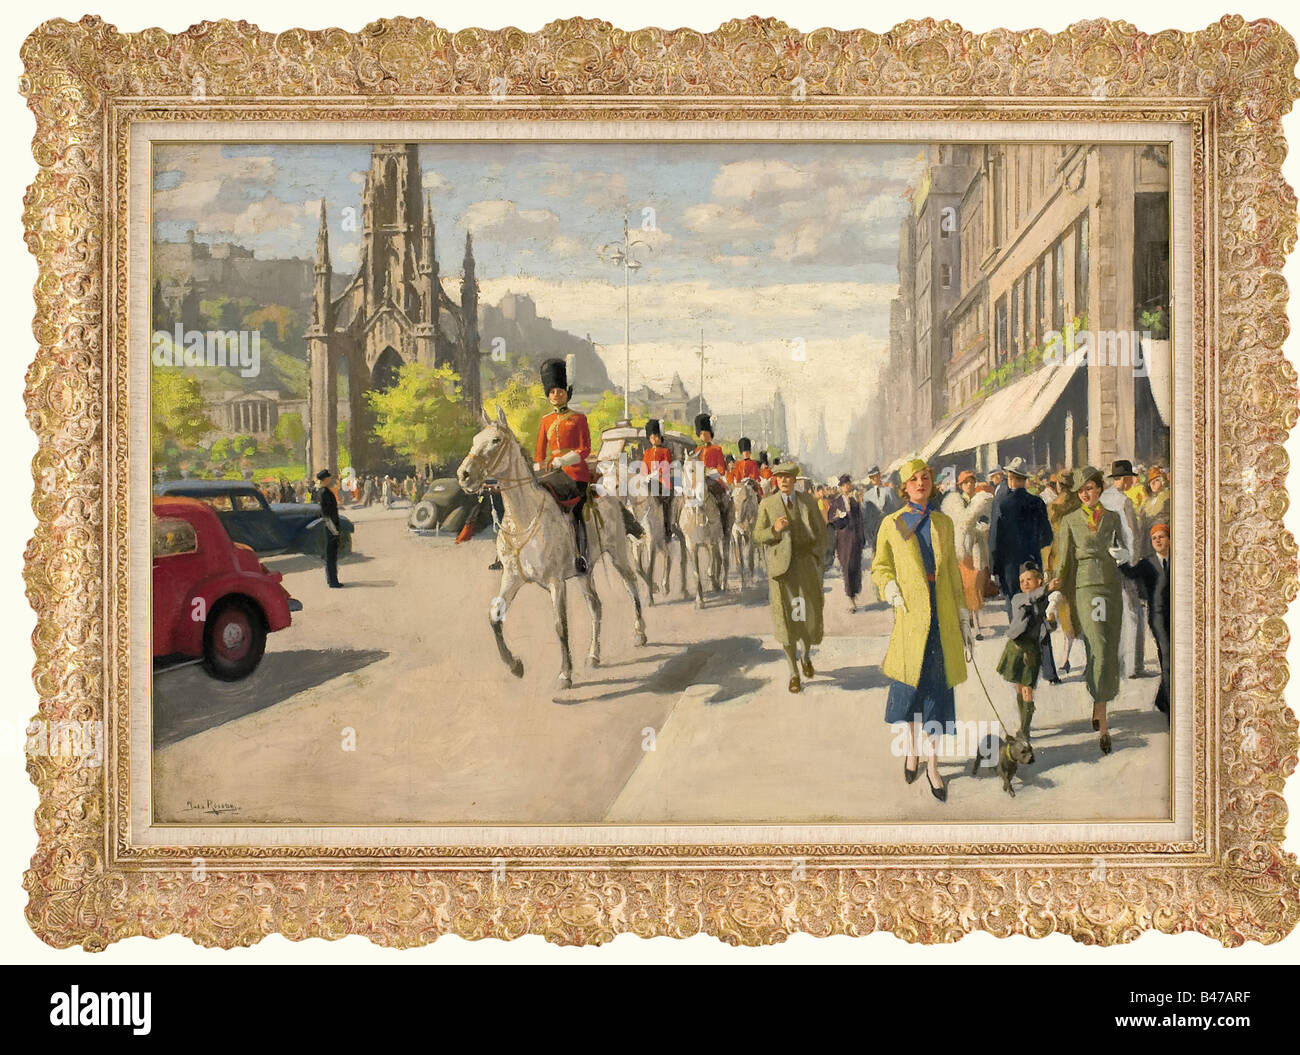 Jacobus van Rossum (born 1881), Officers of the Grenadier Guards in Edinburgh Oil on wood. Scene of a busy street in the 1930s, in the centre officers on horseback, on the left the Scott monument, in the background Edinburgh Castle. Signed on the lower left. Gilt stucco frame. Size of the painting 92 x 62 cm, framed 112 x 82 cm. fine arts, people, 20th century, object, objects, stills, clipping, clippings, cut out, cut-out, cut-outs, painting, paintings, picture in frame, pictures, framed, illustrations, Artist's Copyright has not to be cleared Stock Photo